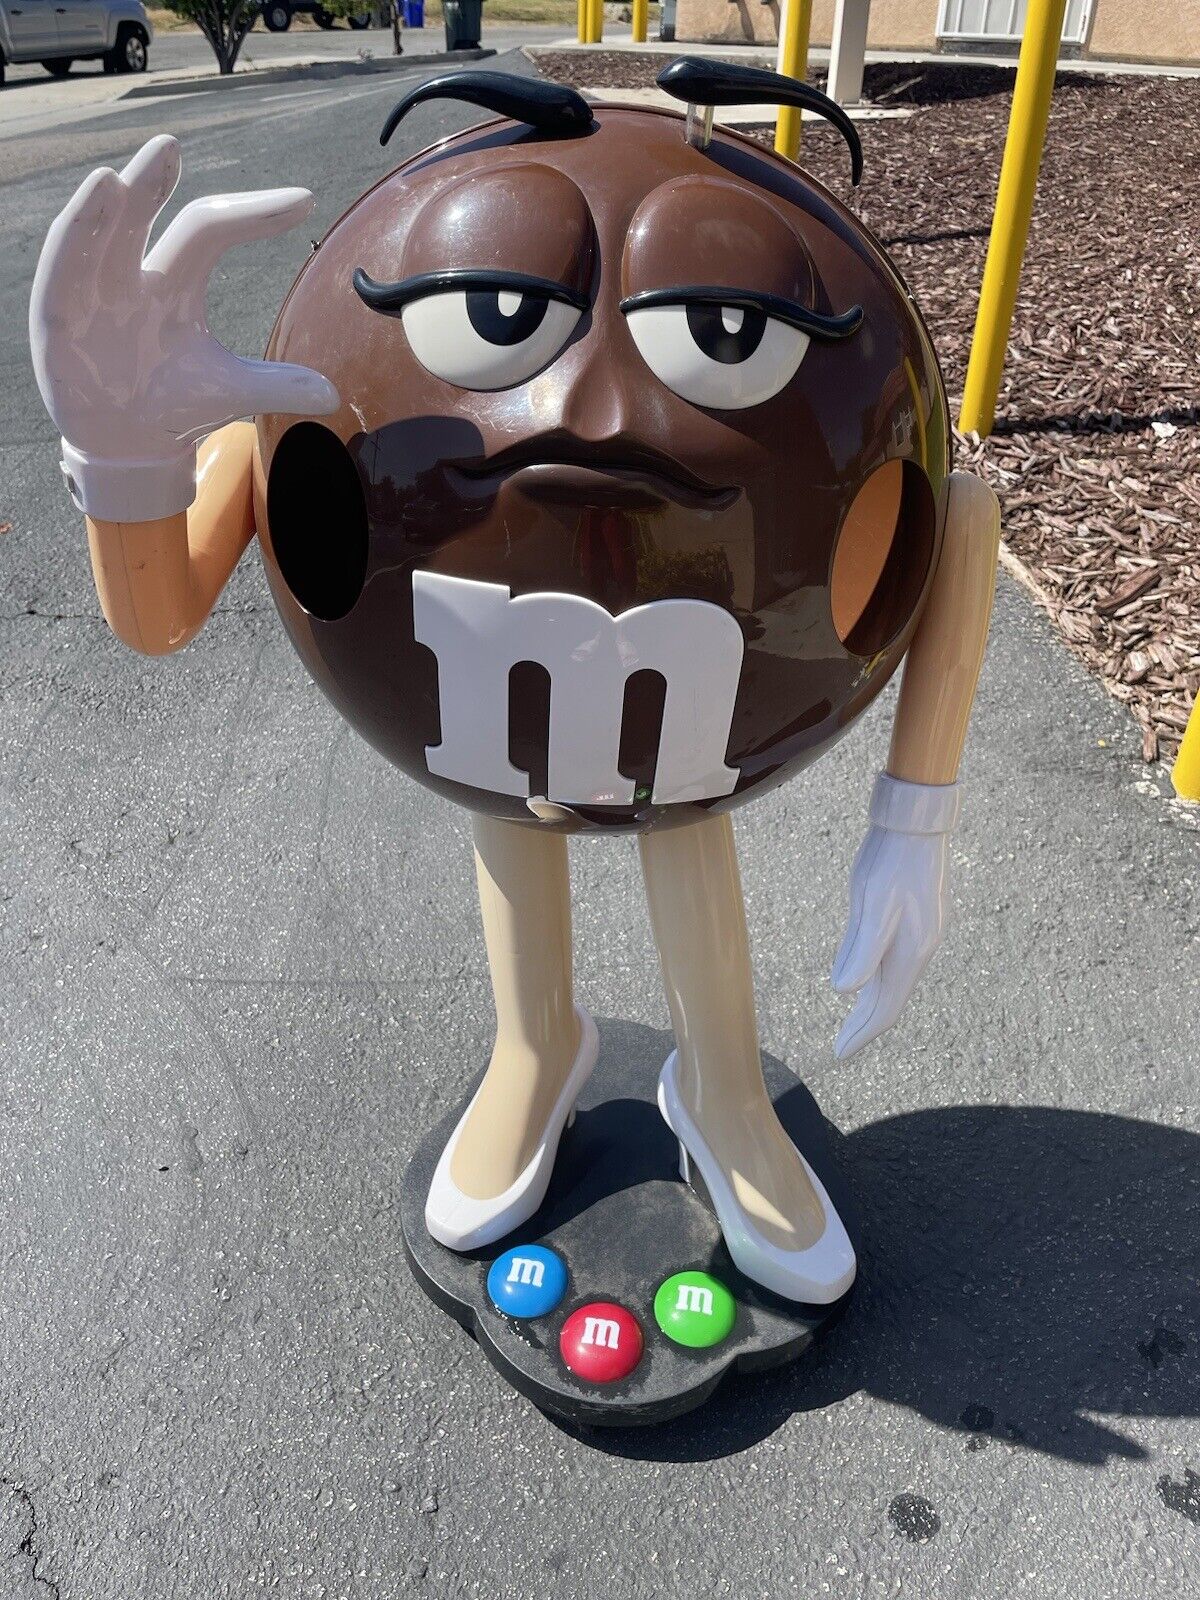 M&M Chocolate Lady Brown Store Candy Display Character on Wheels Collectible.